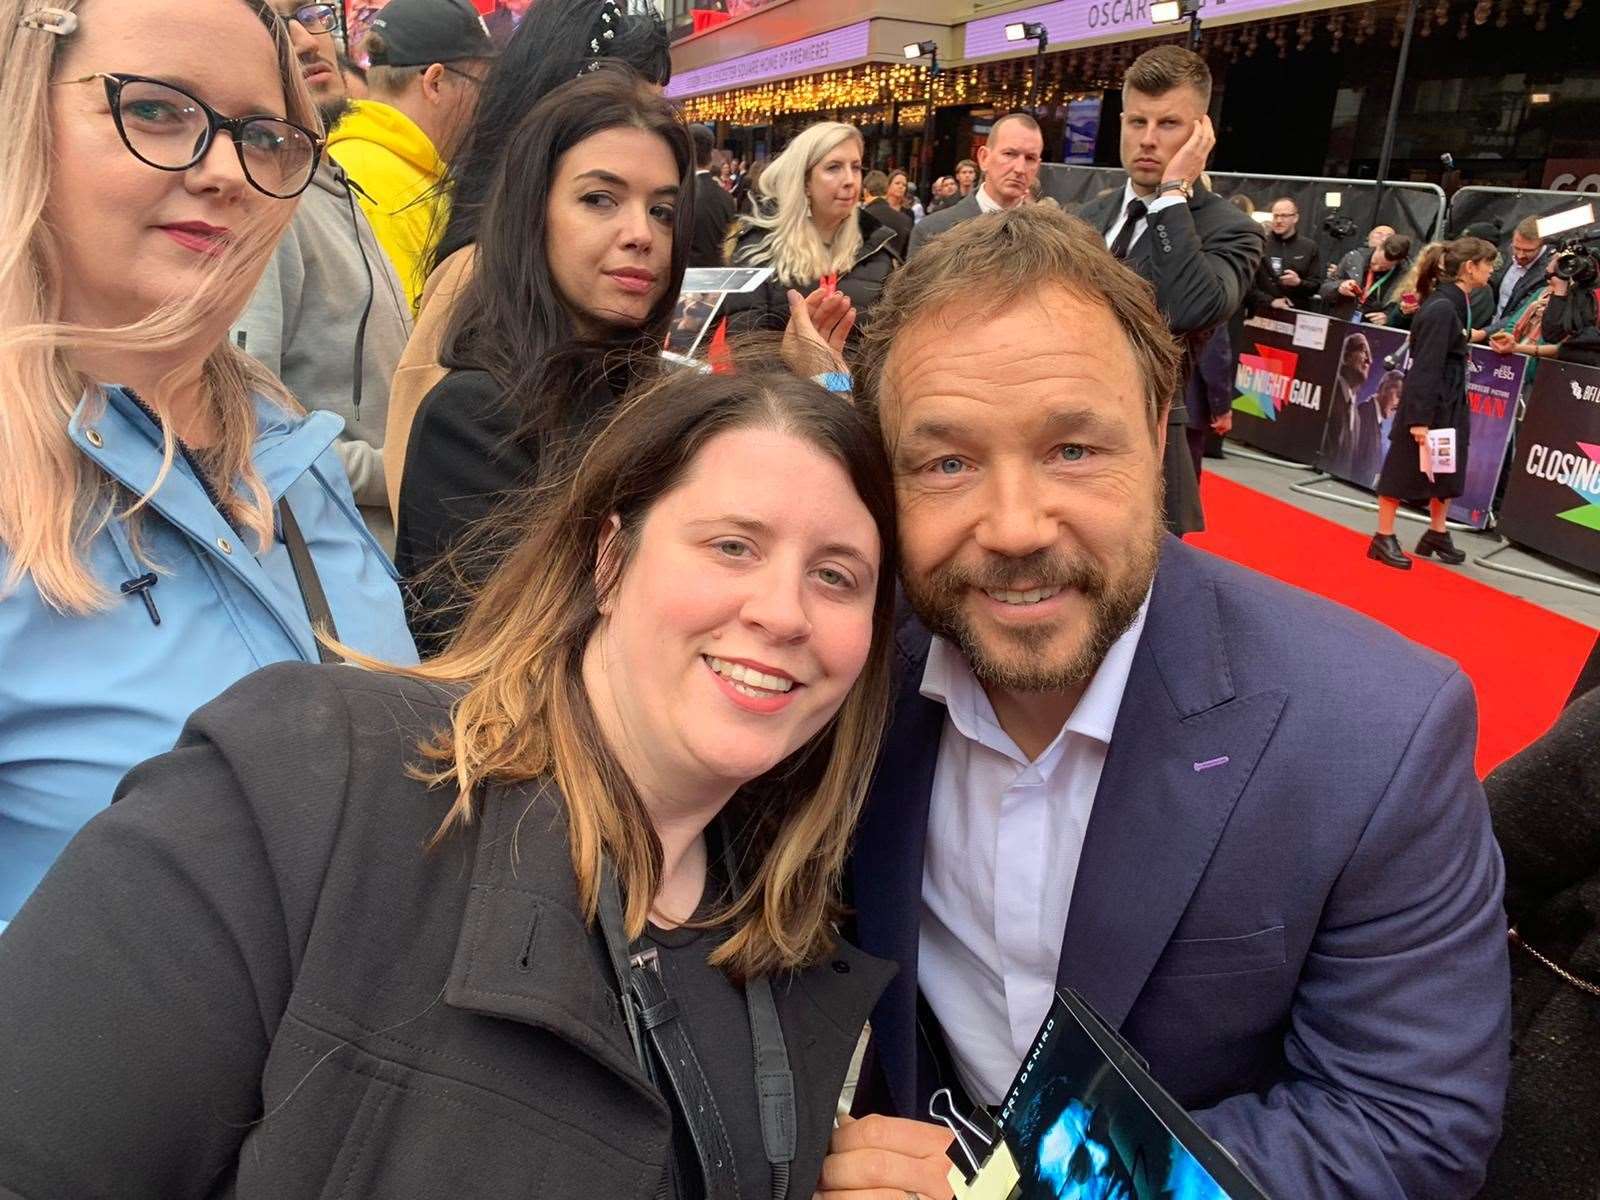 Actor Stephen Graham with Becca Hill at The Irishman premiere. (19976879)